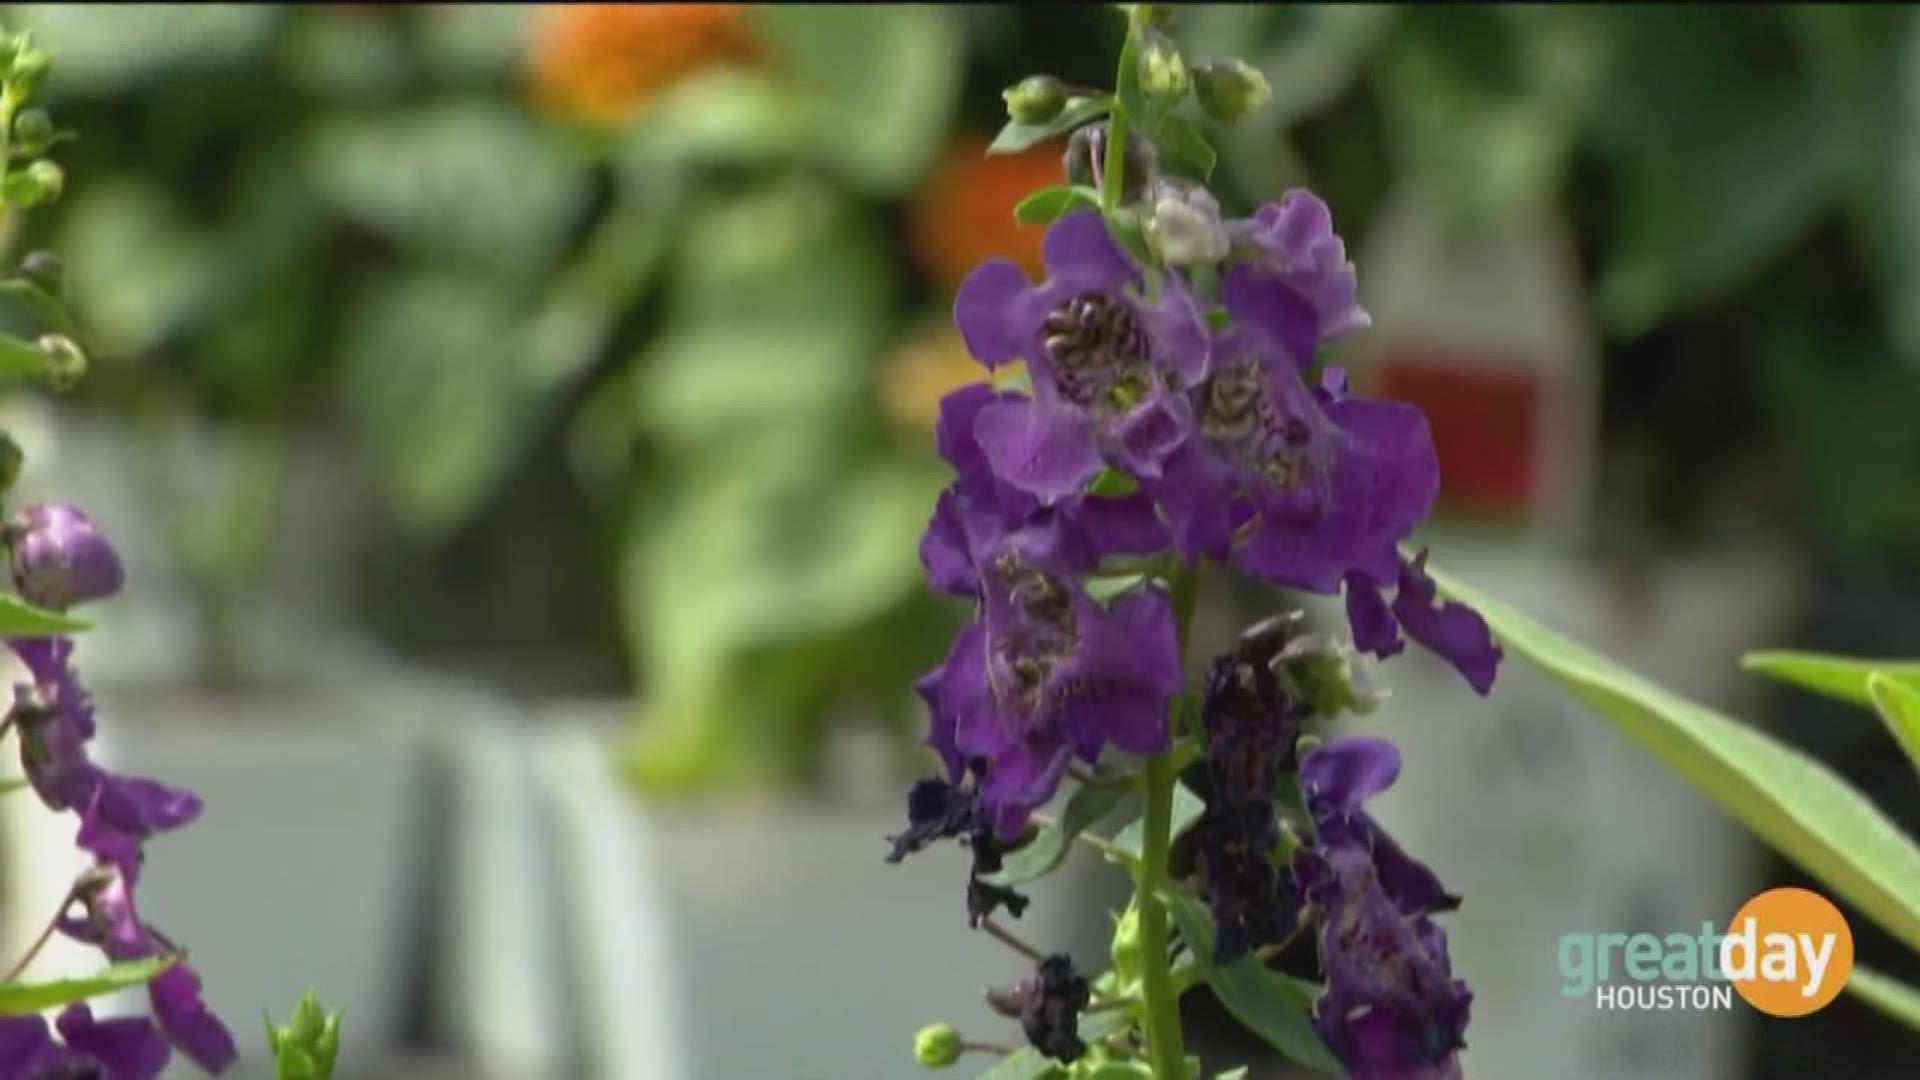 Great Day's Cristina Kooker learns about plants that will be the Houston heat and be good for your seasonal allergies, too! 